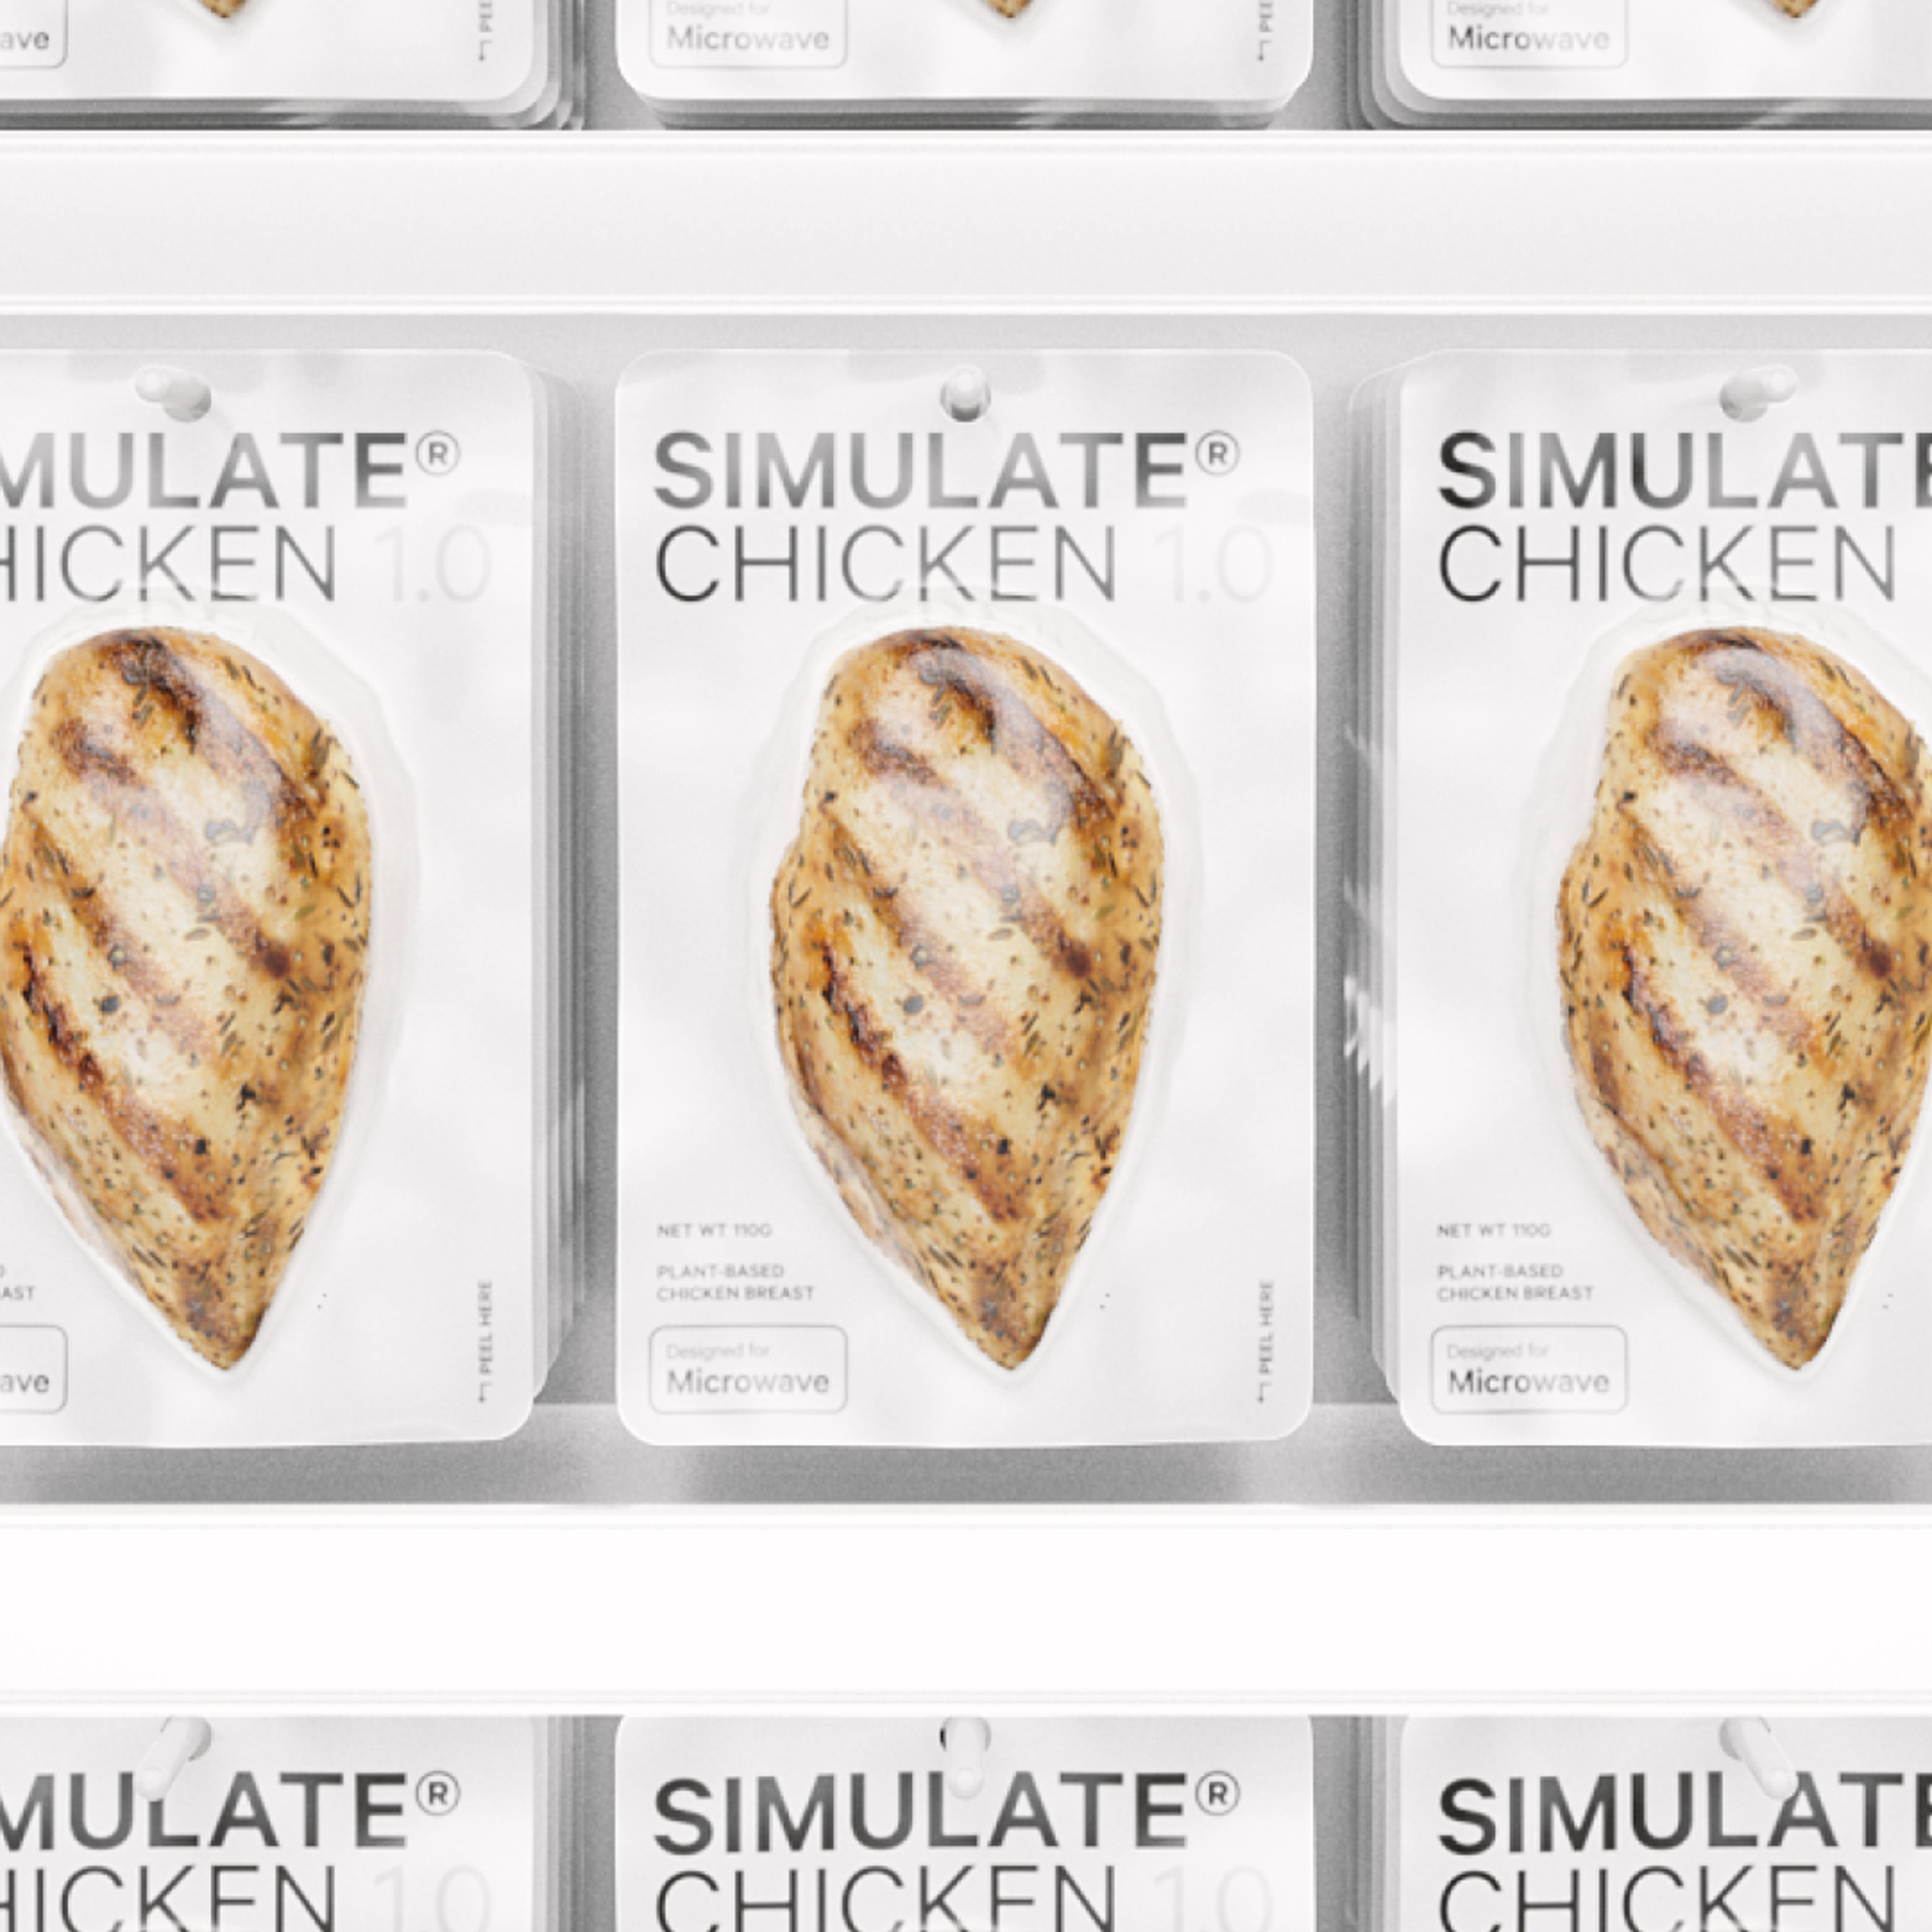 Rows of individually wrapped chicken breasts hanging on a store display